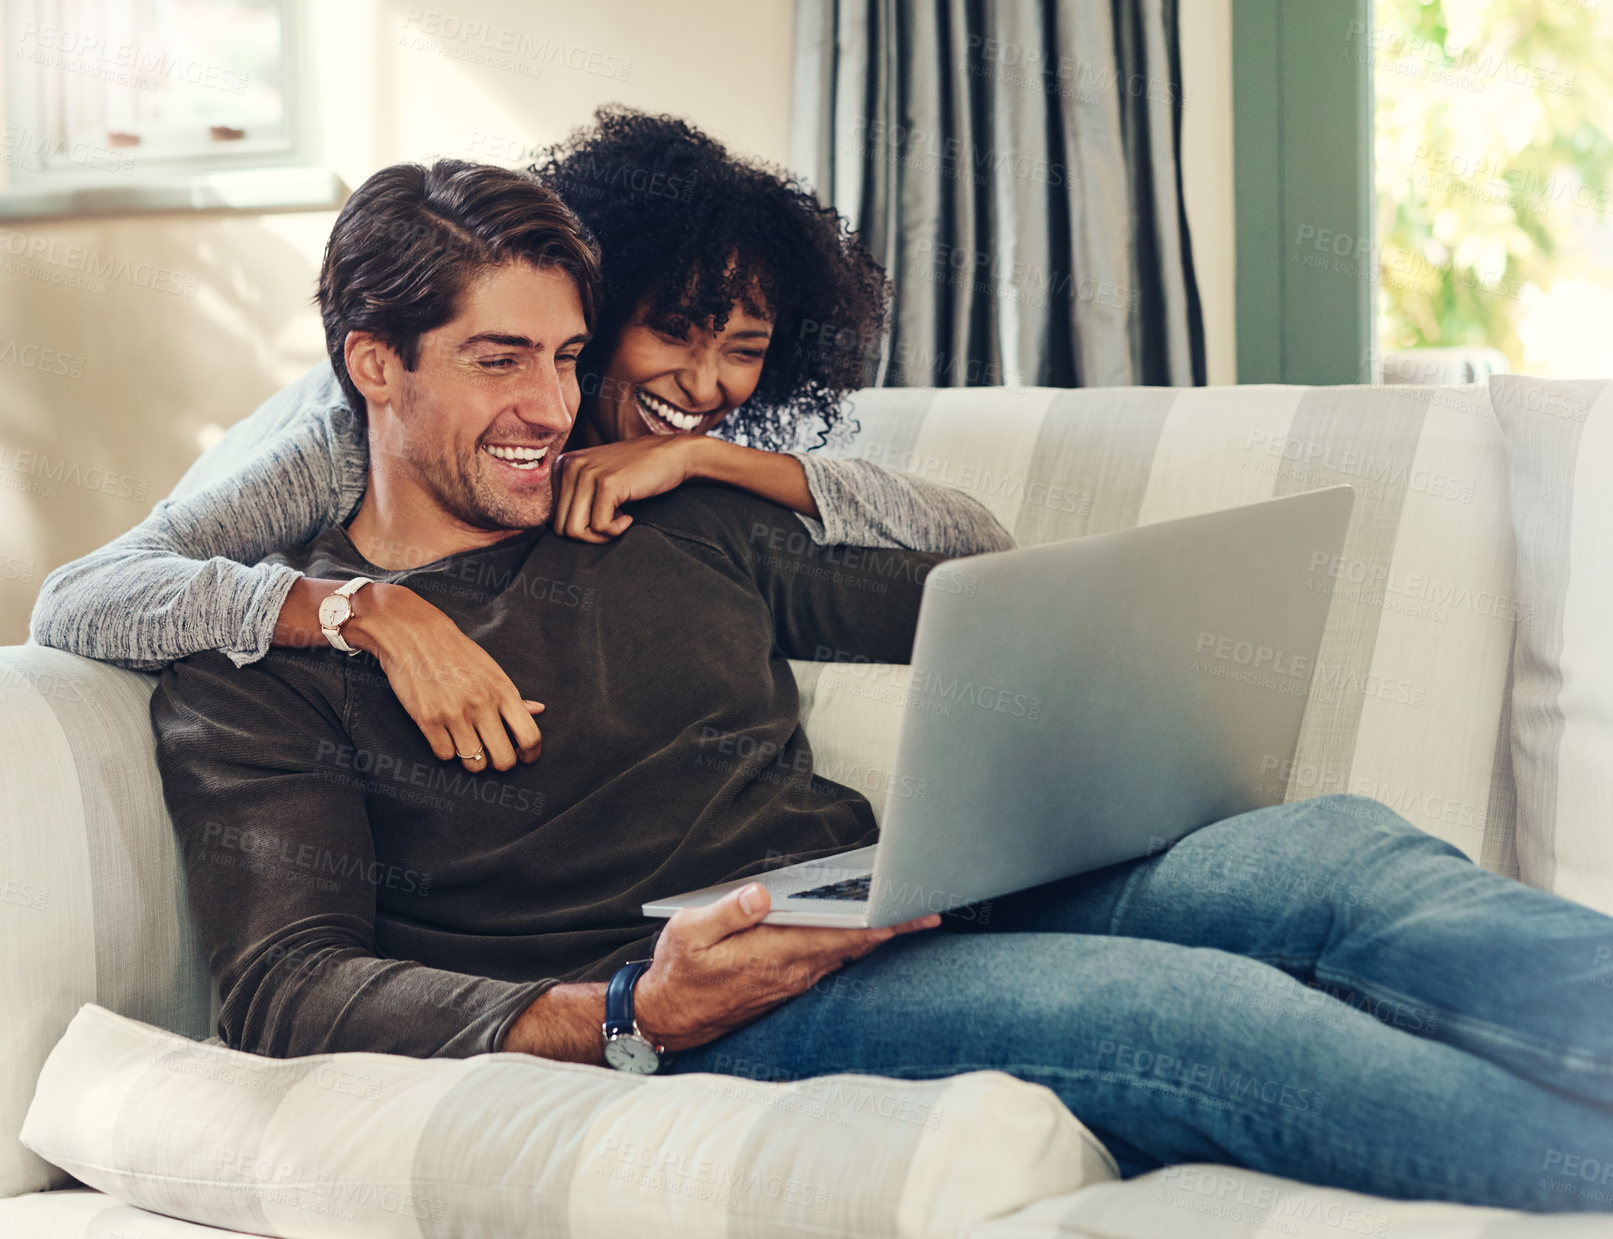 Buy stock photo Shot of an affectionate young couple using a laptop together while relaxing in their living room at home